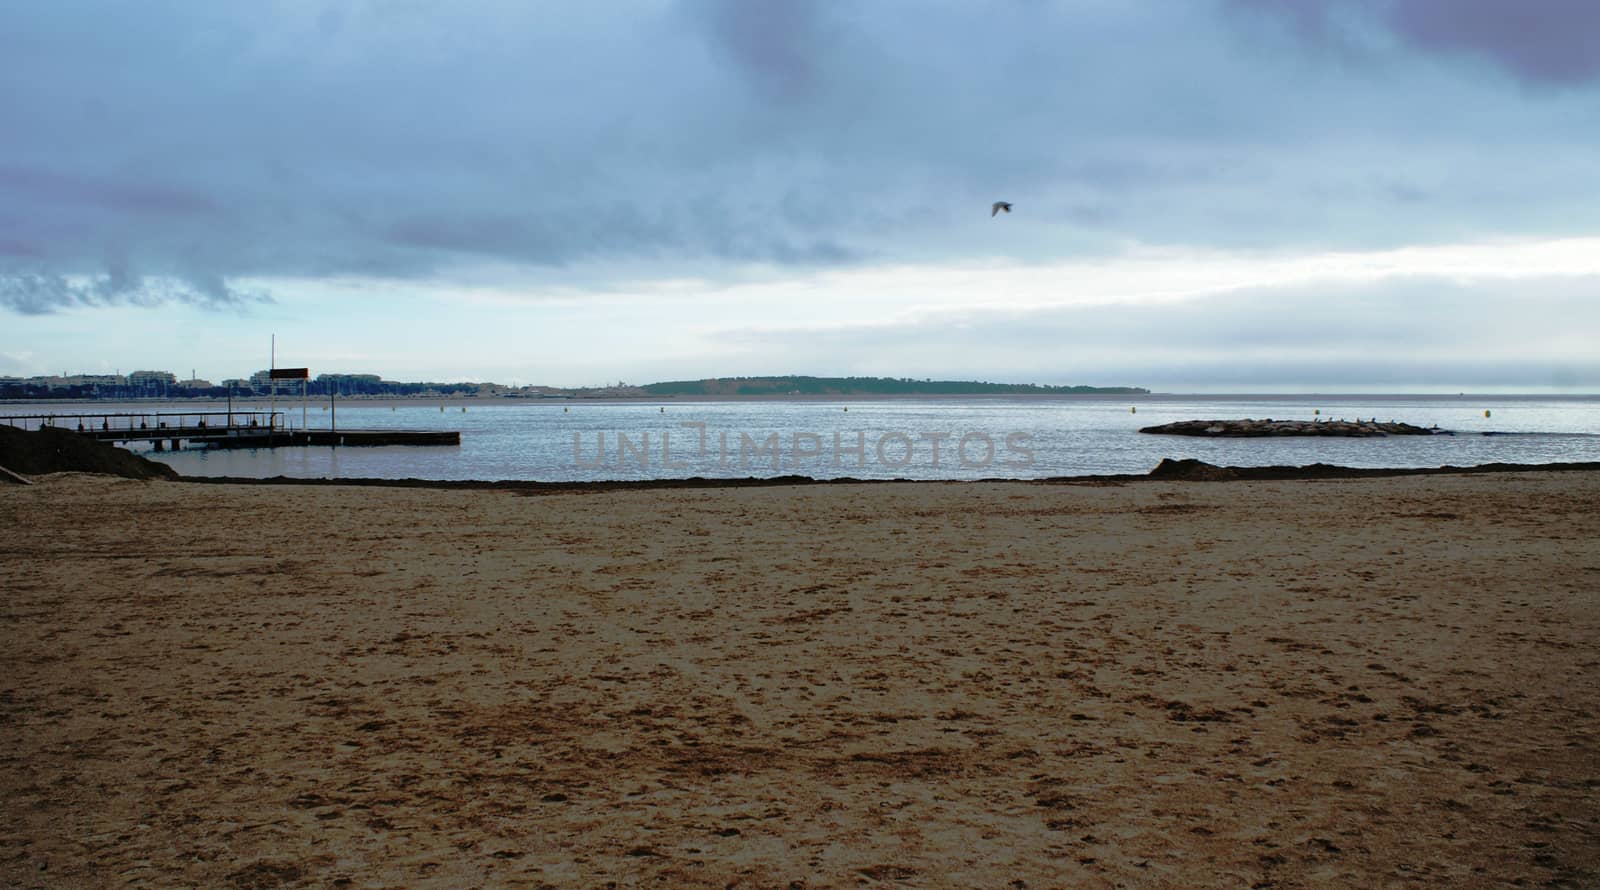 Beach in winter, autamn, without sunny and clouds